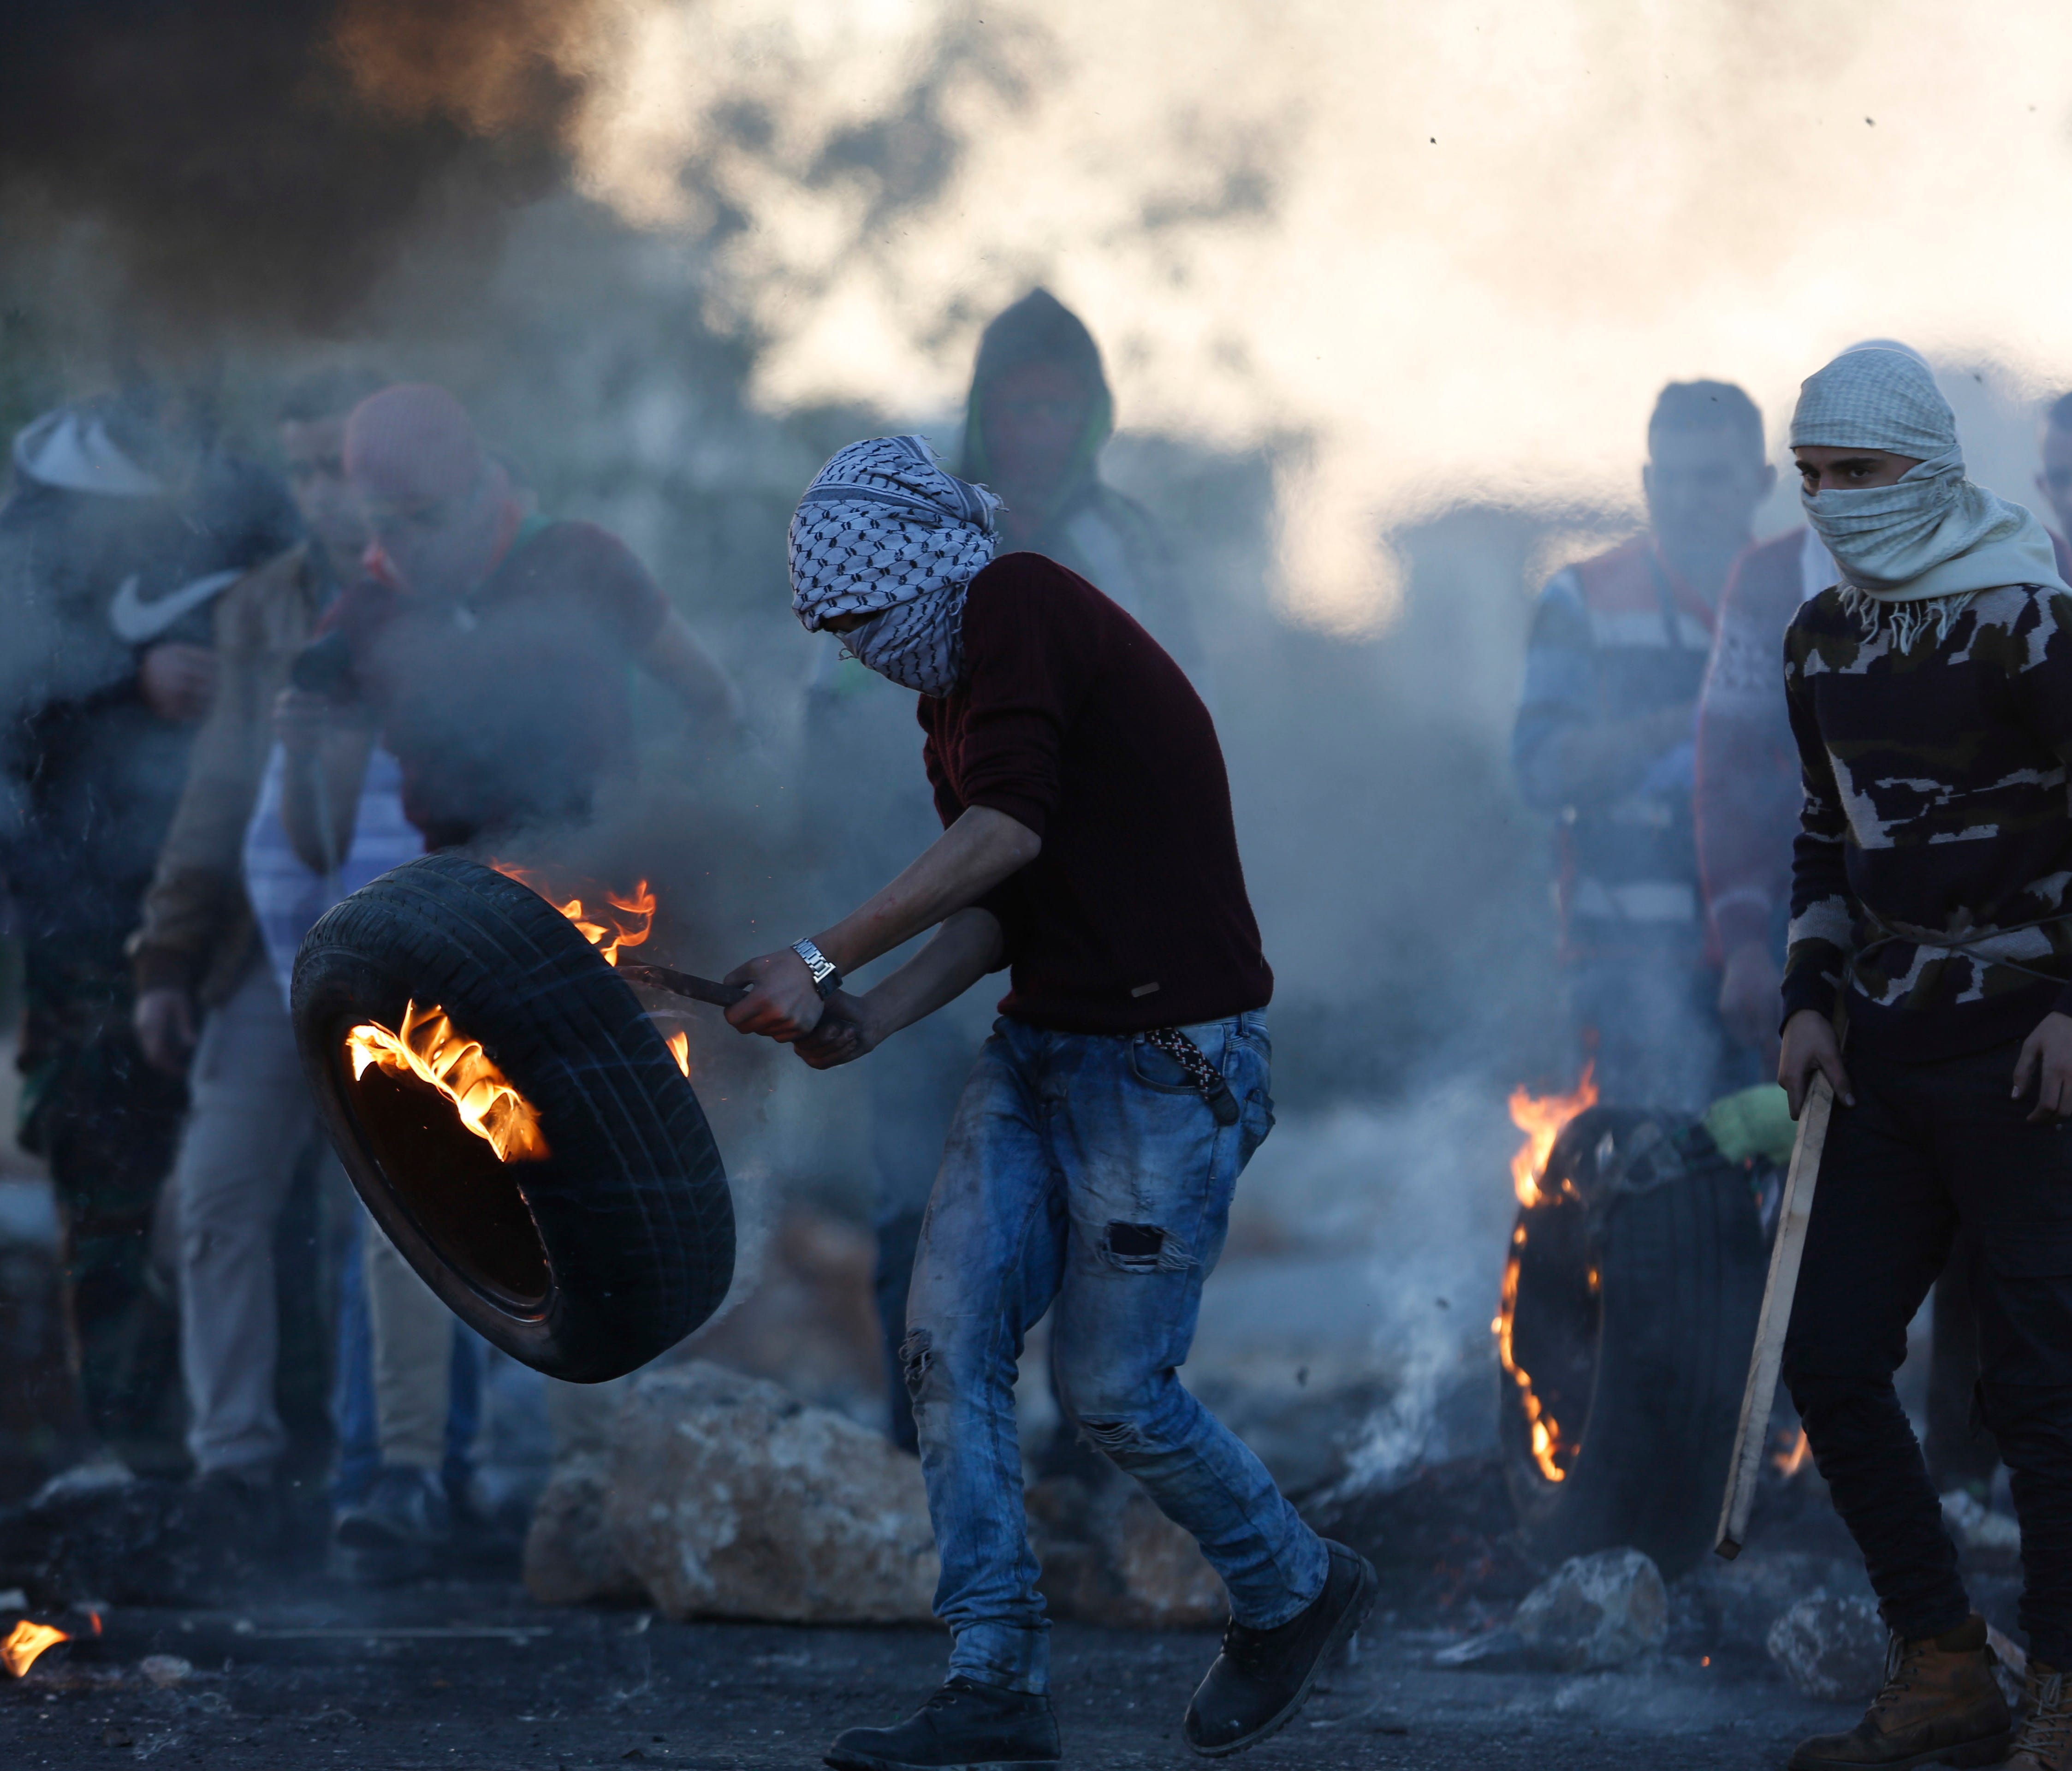 Palestinians burn tires during protests against U.S. President Donald Trump's decision to recognize Jerusalem as the capital of Israel in the West Bank town of Ramallah on Dec. 16, 2017.